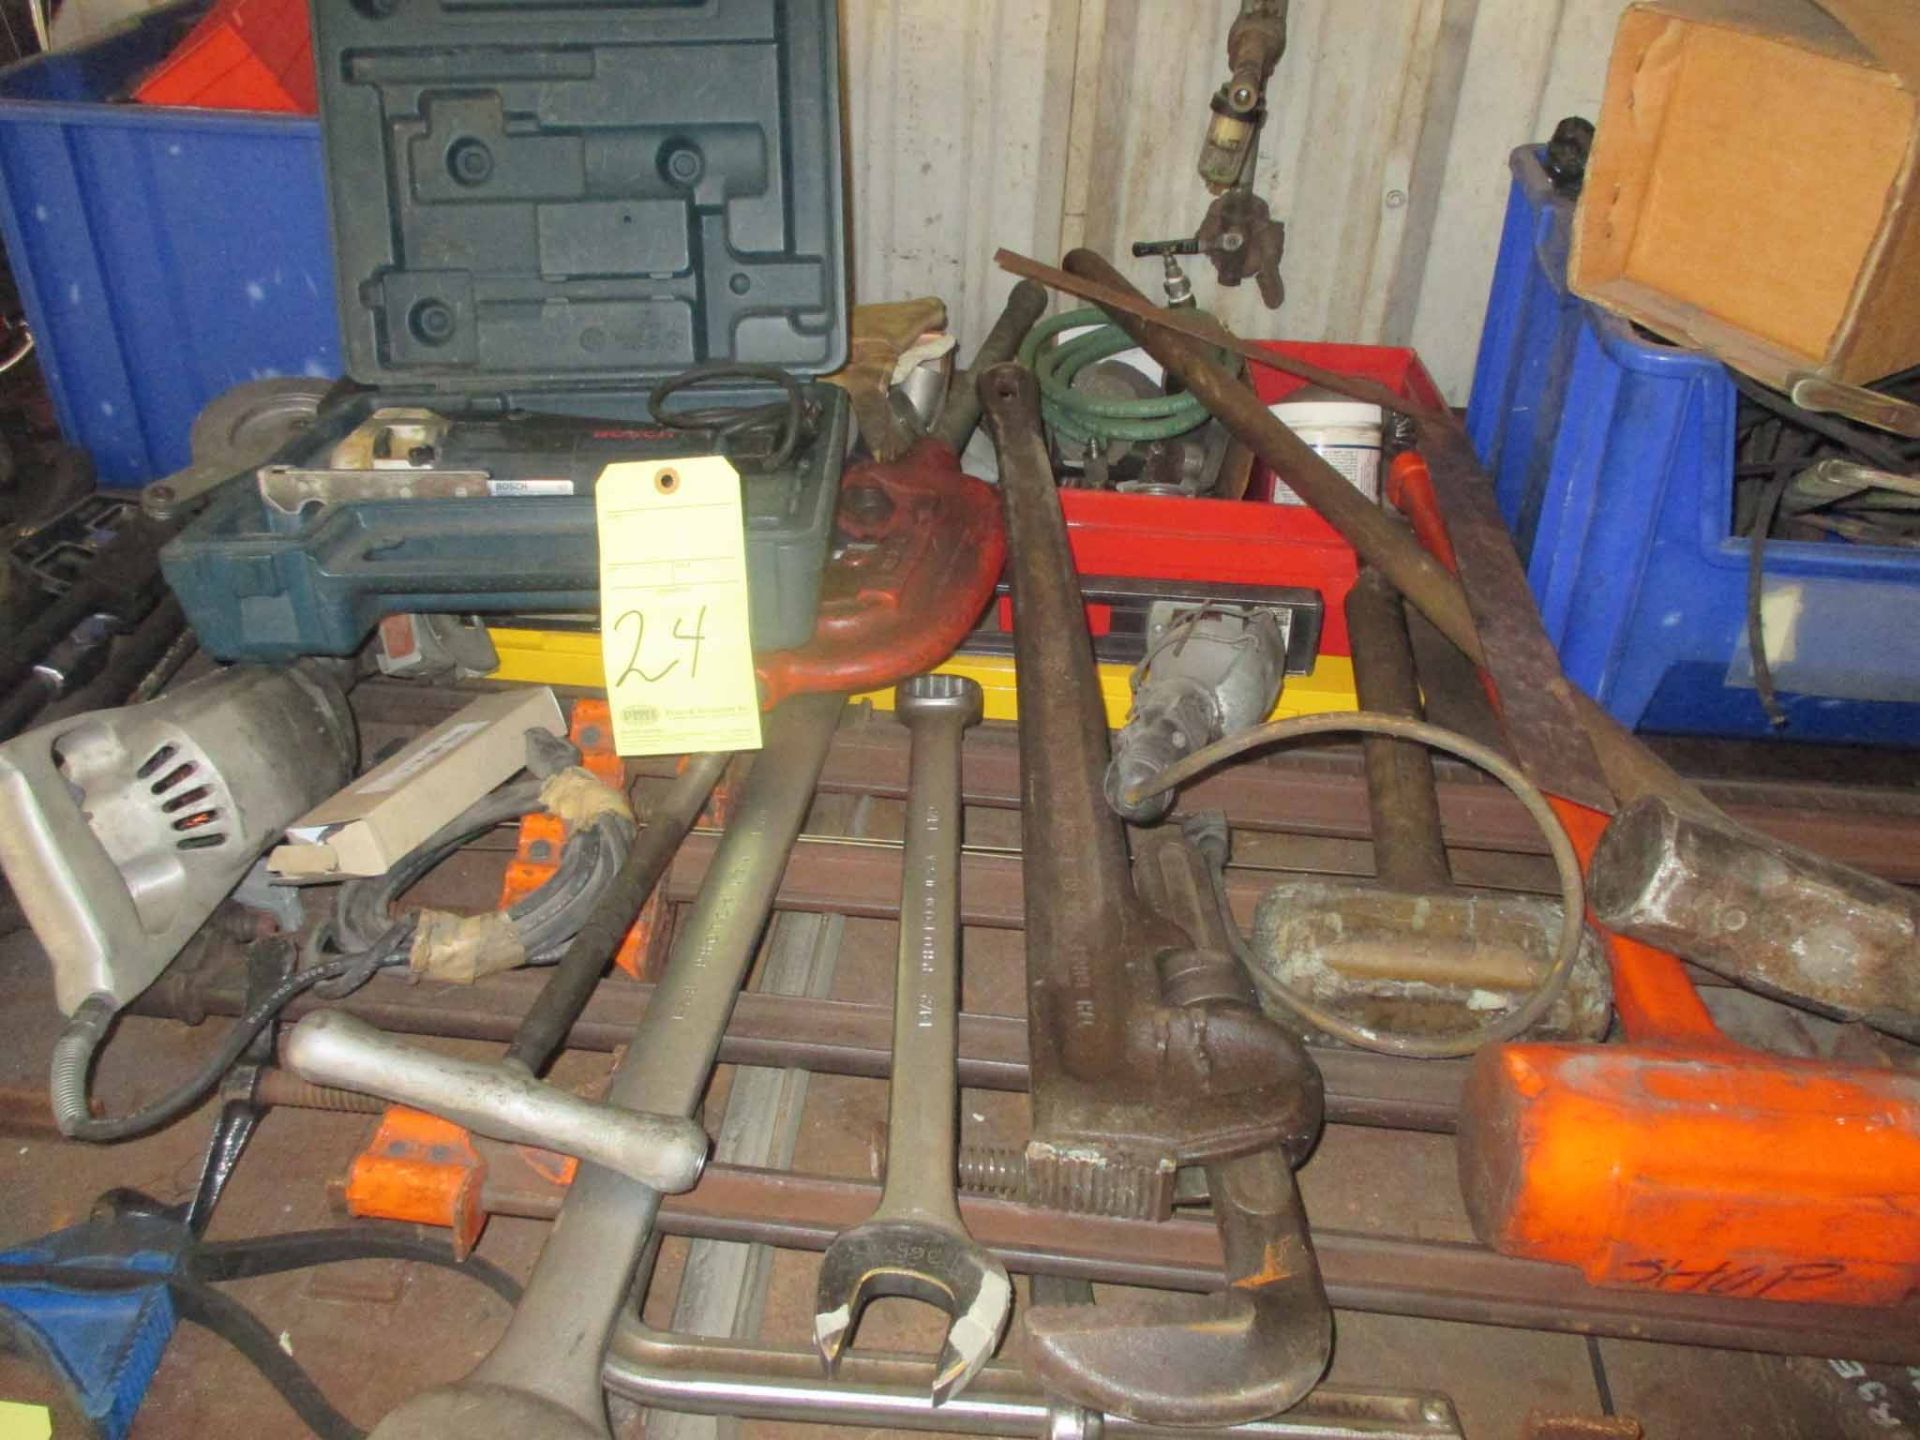 LOT OF HAND TOOLS CONSISTING OF: shop saw, skull saw, sledge hammers, etc.